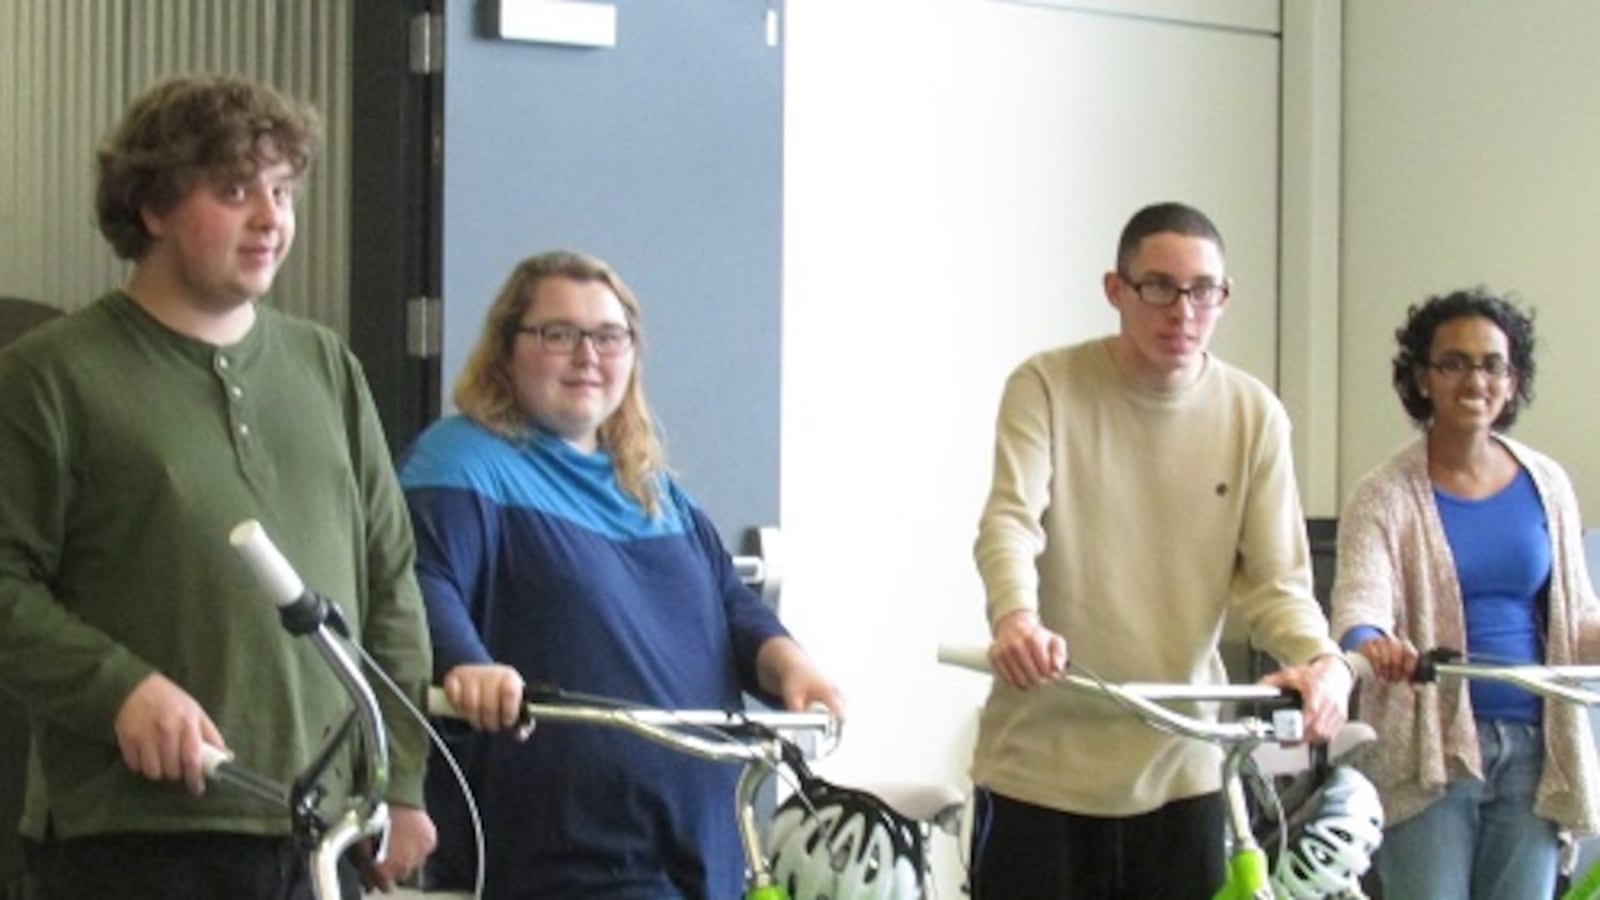 Students in the "Transitions In Englewood Schools Program" with new bikes at a ribbon-cuttin g ceremony on March 7, 2014.